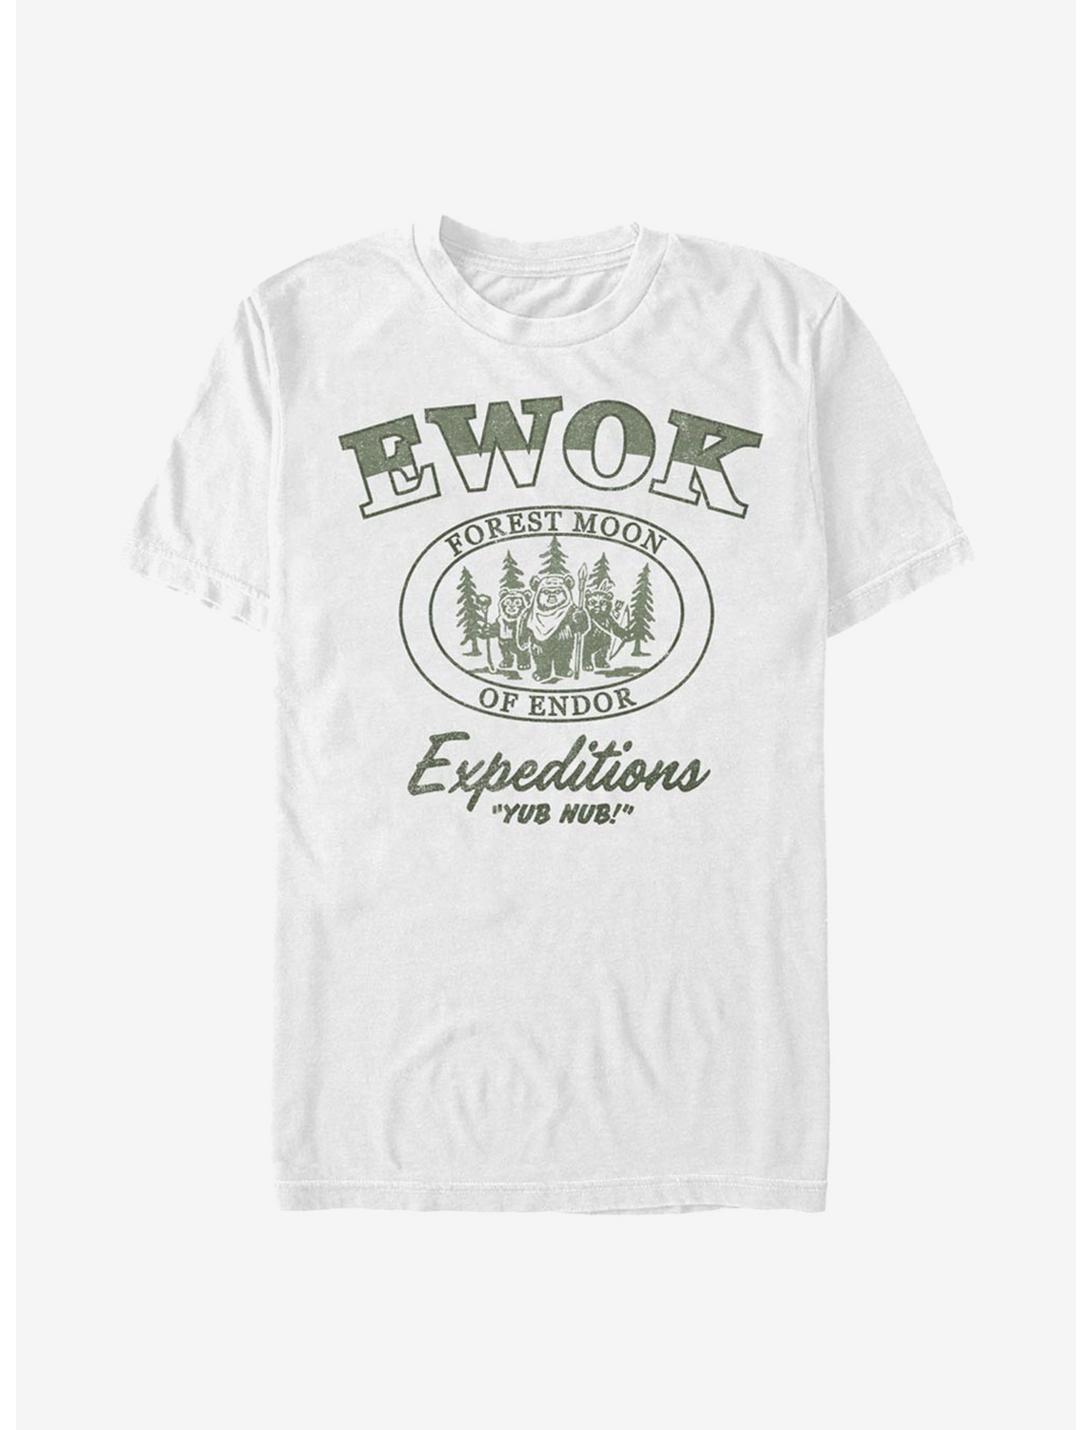 Star Wars Ewok Expeditions T-Shirt, WHITE, hi-res